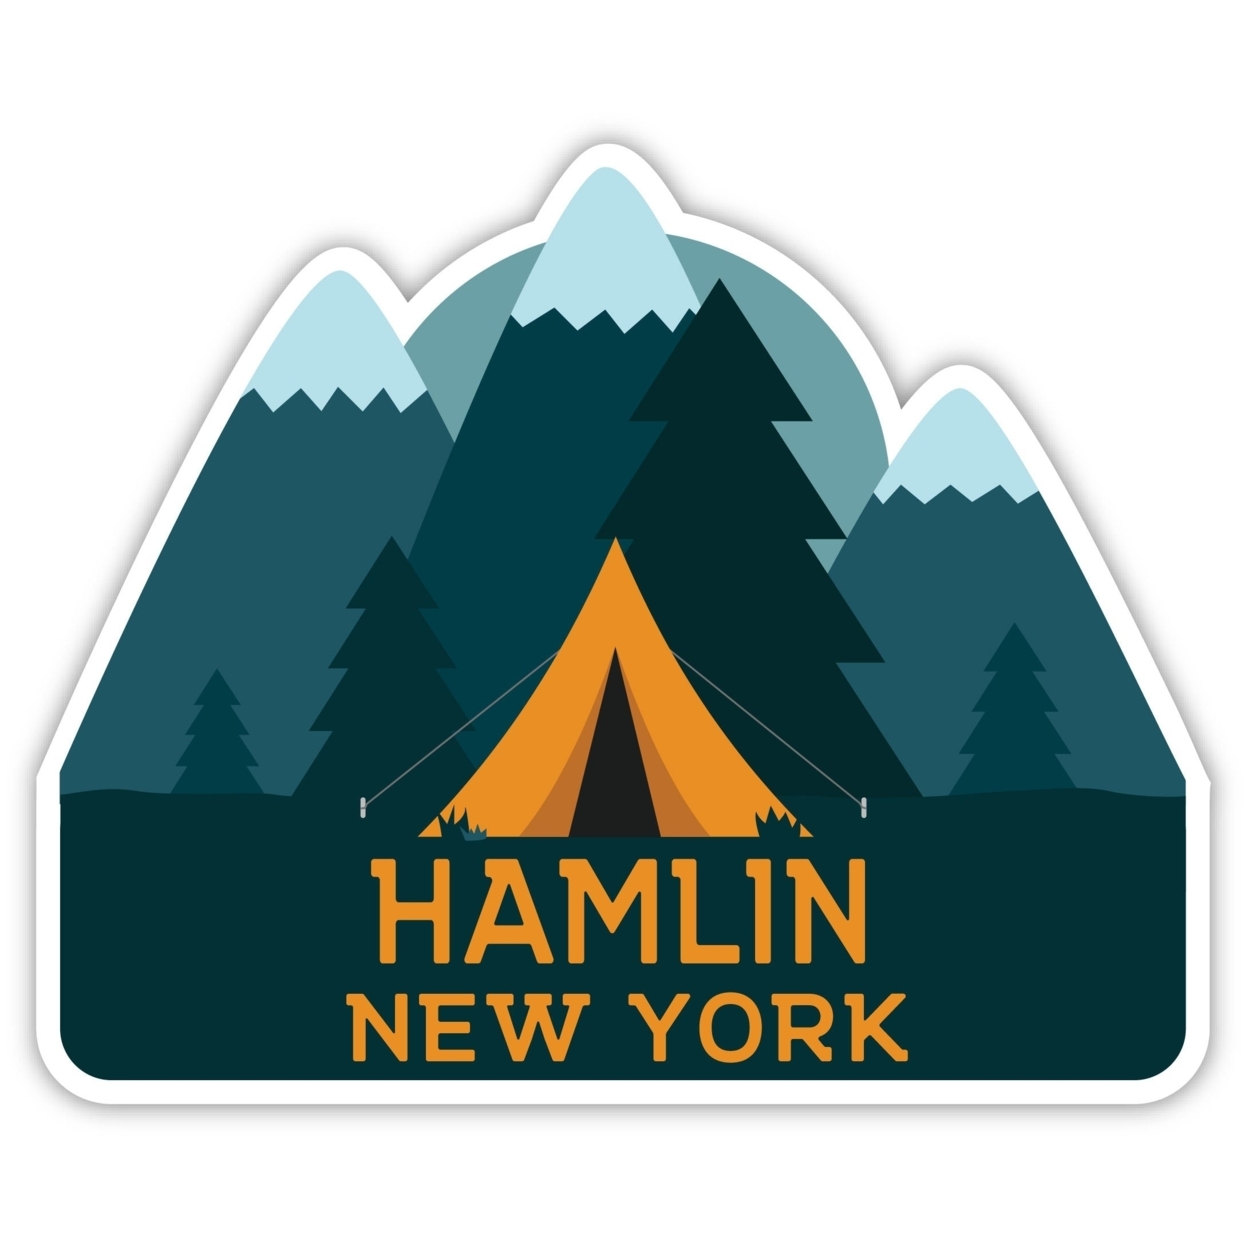 Hamlin New York Souvenir Decorative Stickers (Choose Theme And Size) - 4-Pack, 6-Inch, Tent